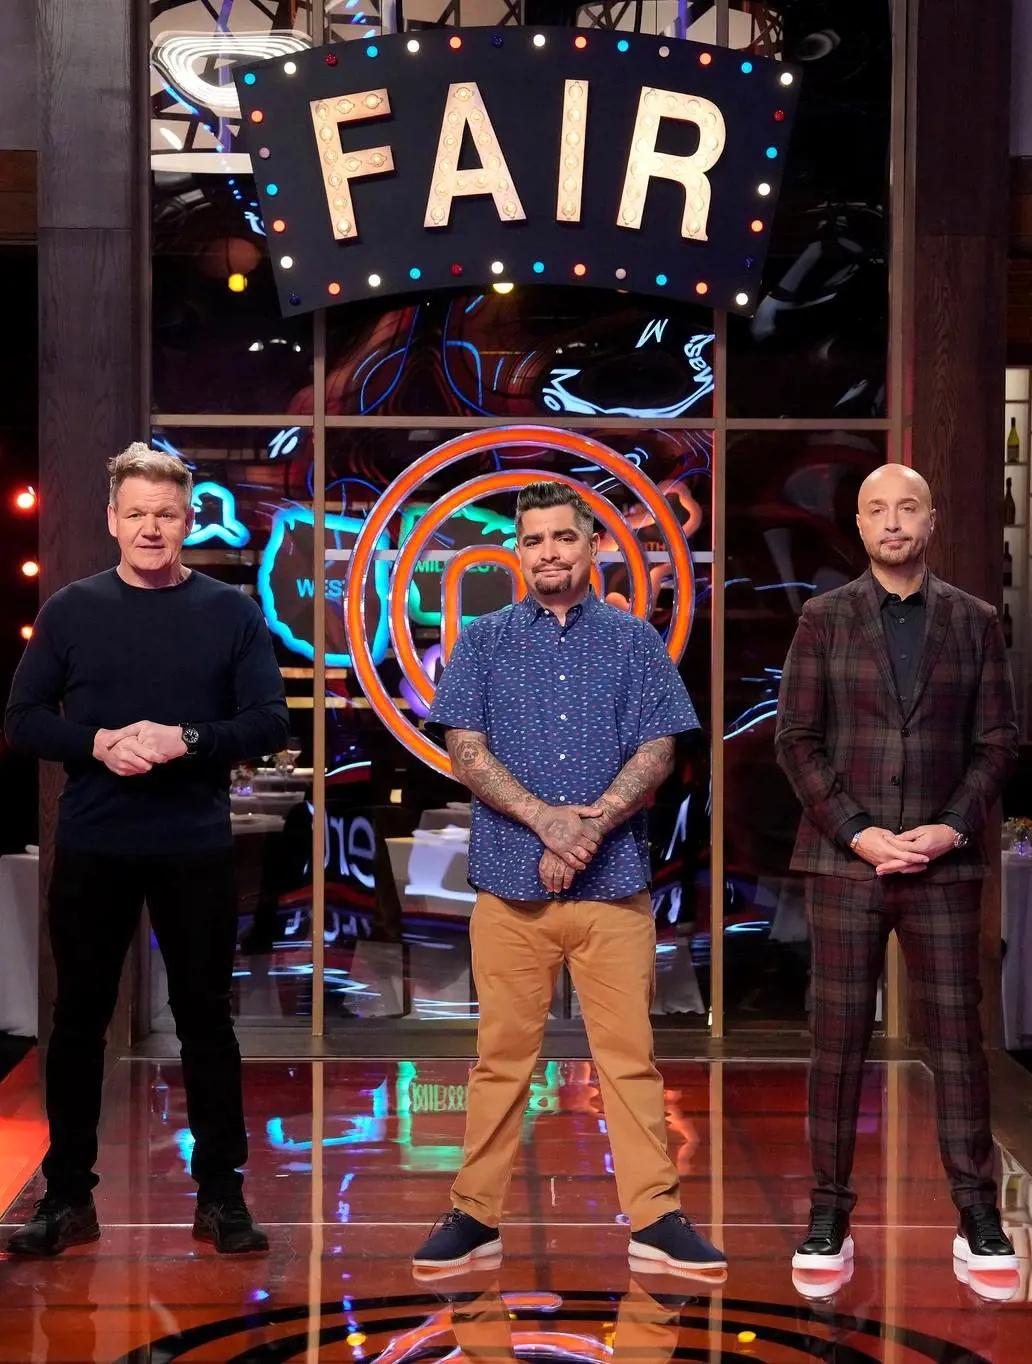 The show features the iconic team of judges consisting of Gordon Ramsay, Aaron Sanchez, and Joe Bastianich